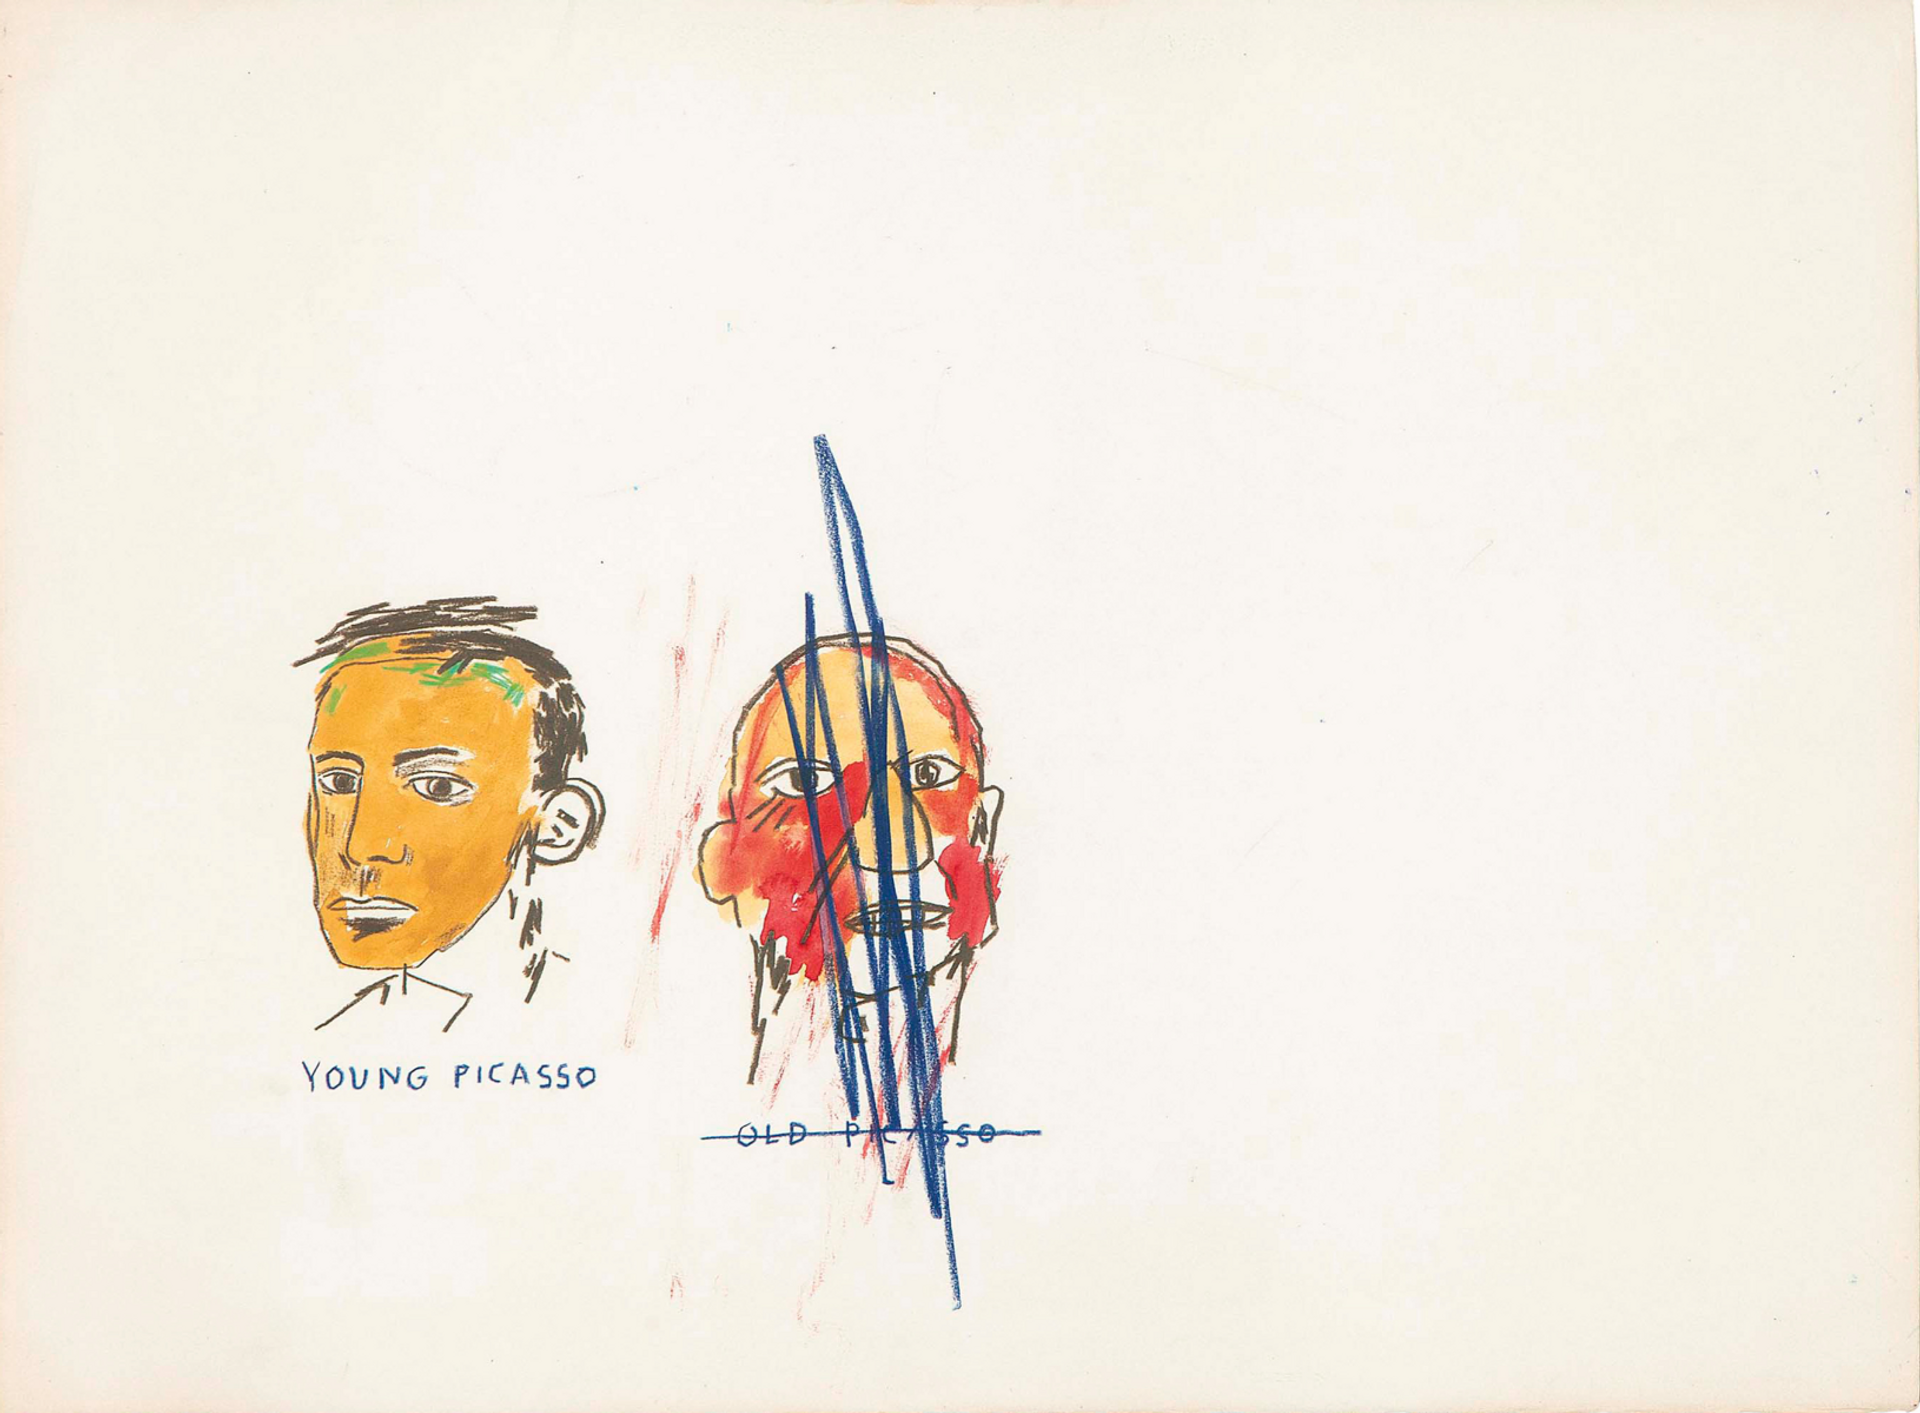 An image of two side-by-side portraits of Pablo Picasso by Jean-Michel Basquiat, one youthful, the other in older age. The depiction of 'Young Picasso' is intricately detailed in an ochre hue, capturing a sense of youthful vigour and observation. Contrastingly, the 'Old Picasso' is rendered in red, his features deliberately obscured with scribbles.